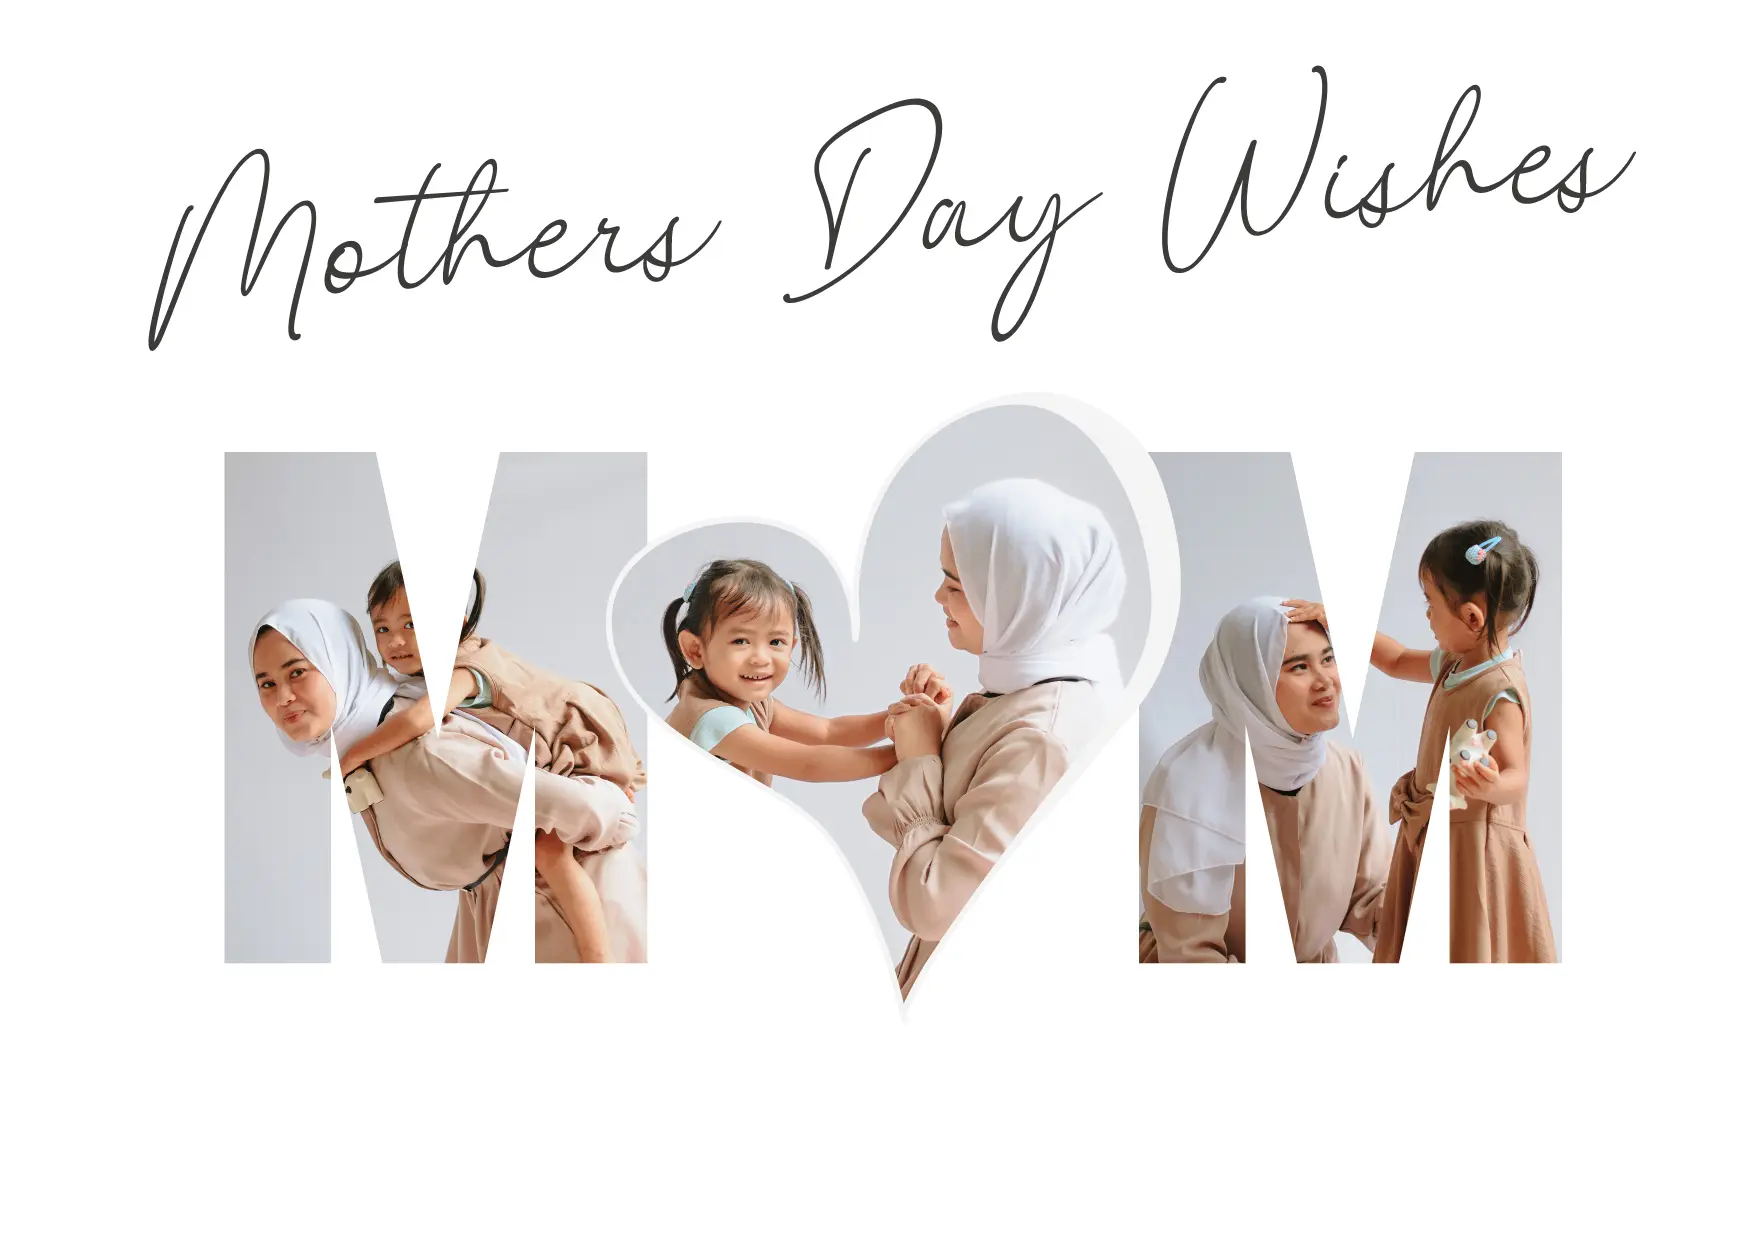 Mothers Day Wishes: Wishes For All Moms